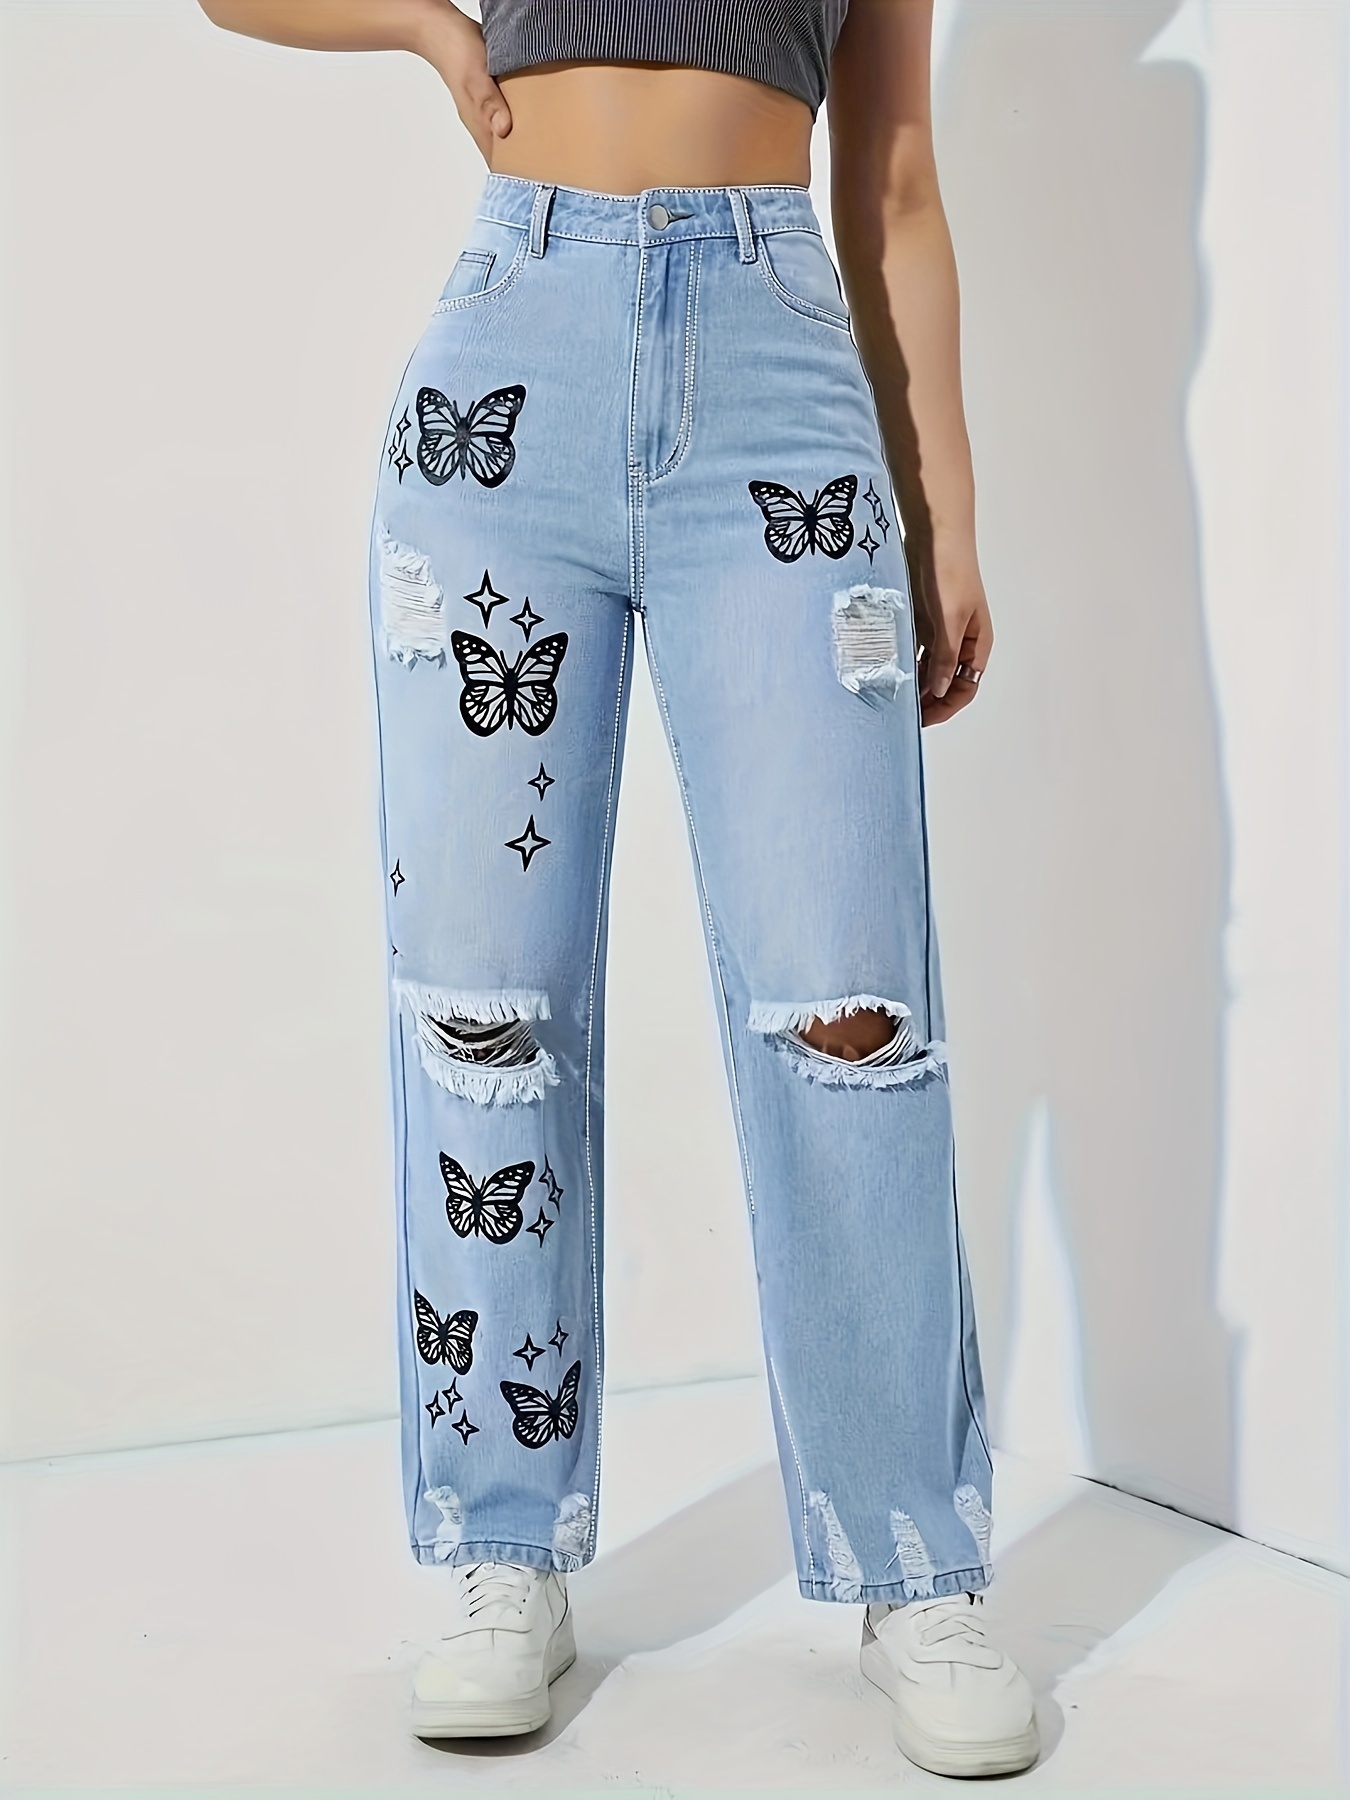 Ripped Knee Cut Distressed Jeans, Light Wash Slash Pocket Button * Casual &  Trendy Pants For Every Day, Women's Denim Jeans & Clothing